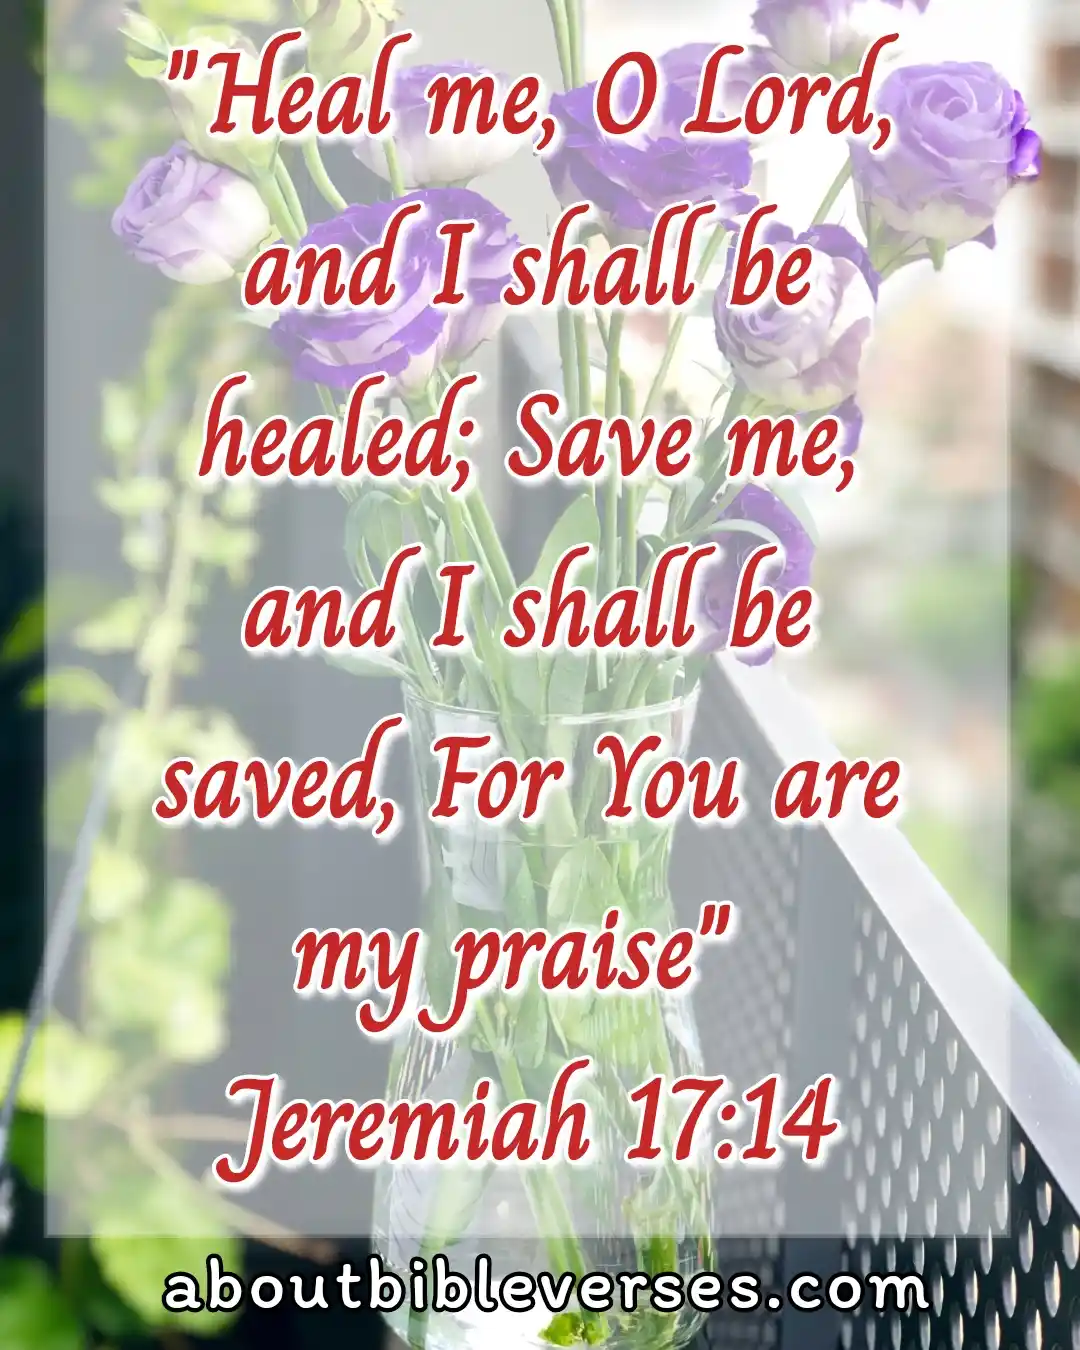 Bible Verses About Emotional Pain And Healing (Jeremiah 17:14)